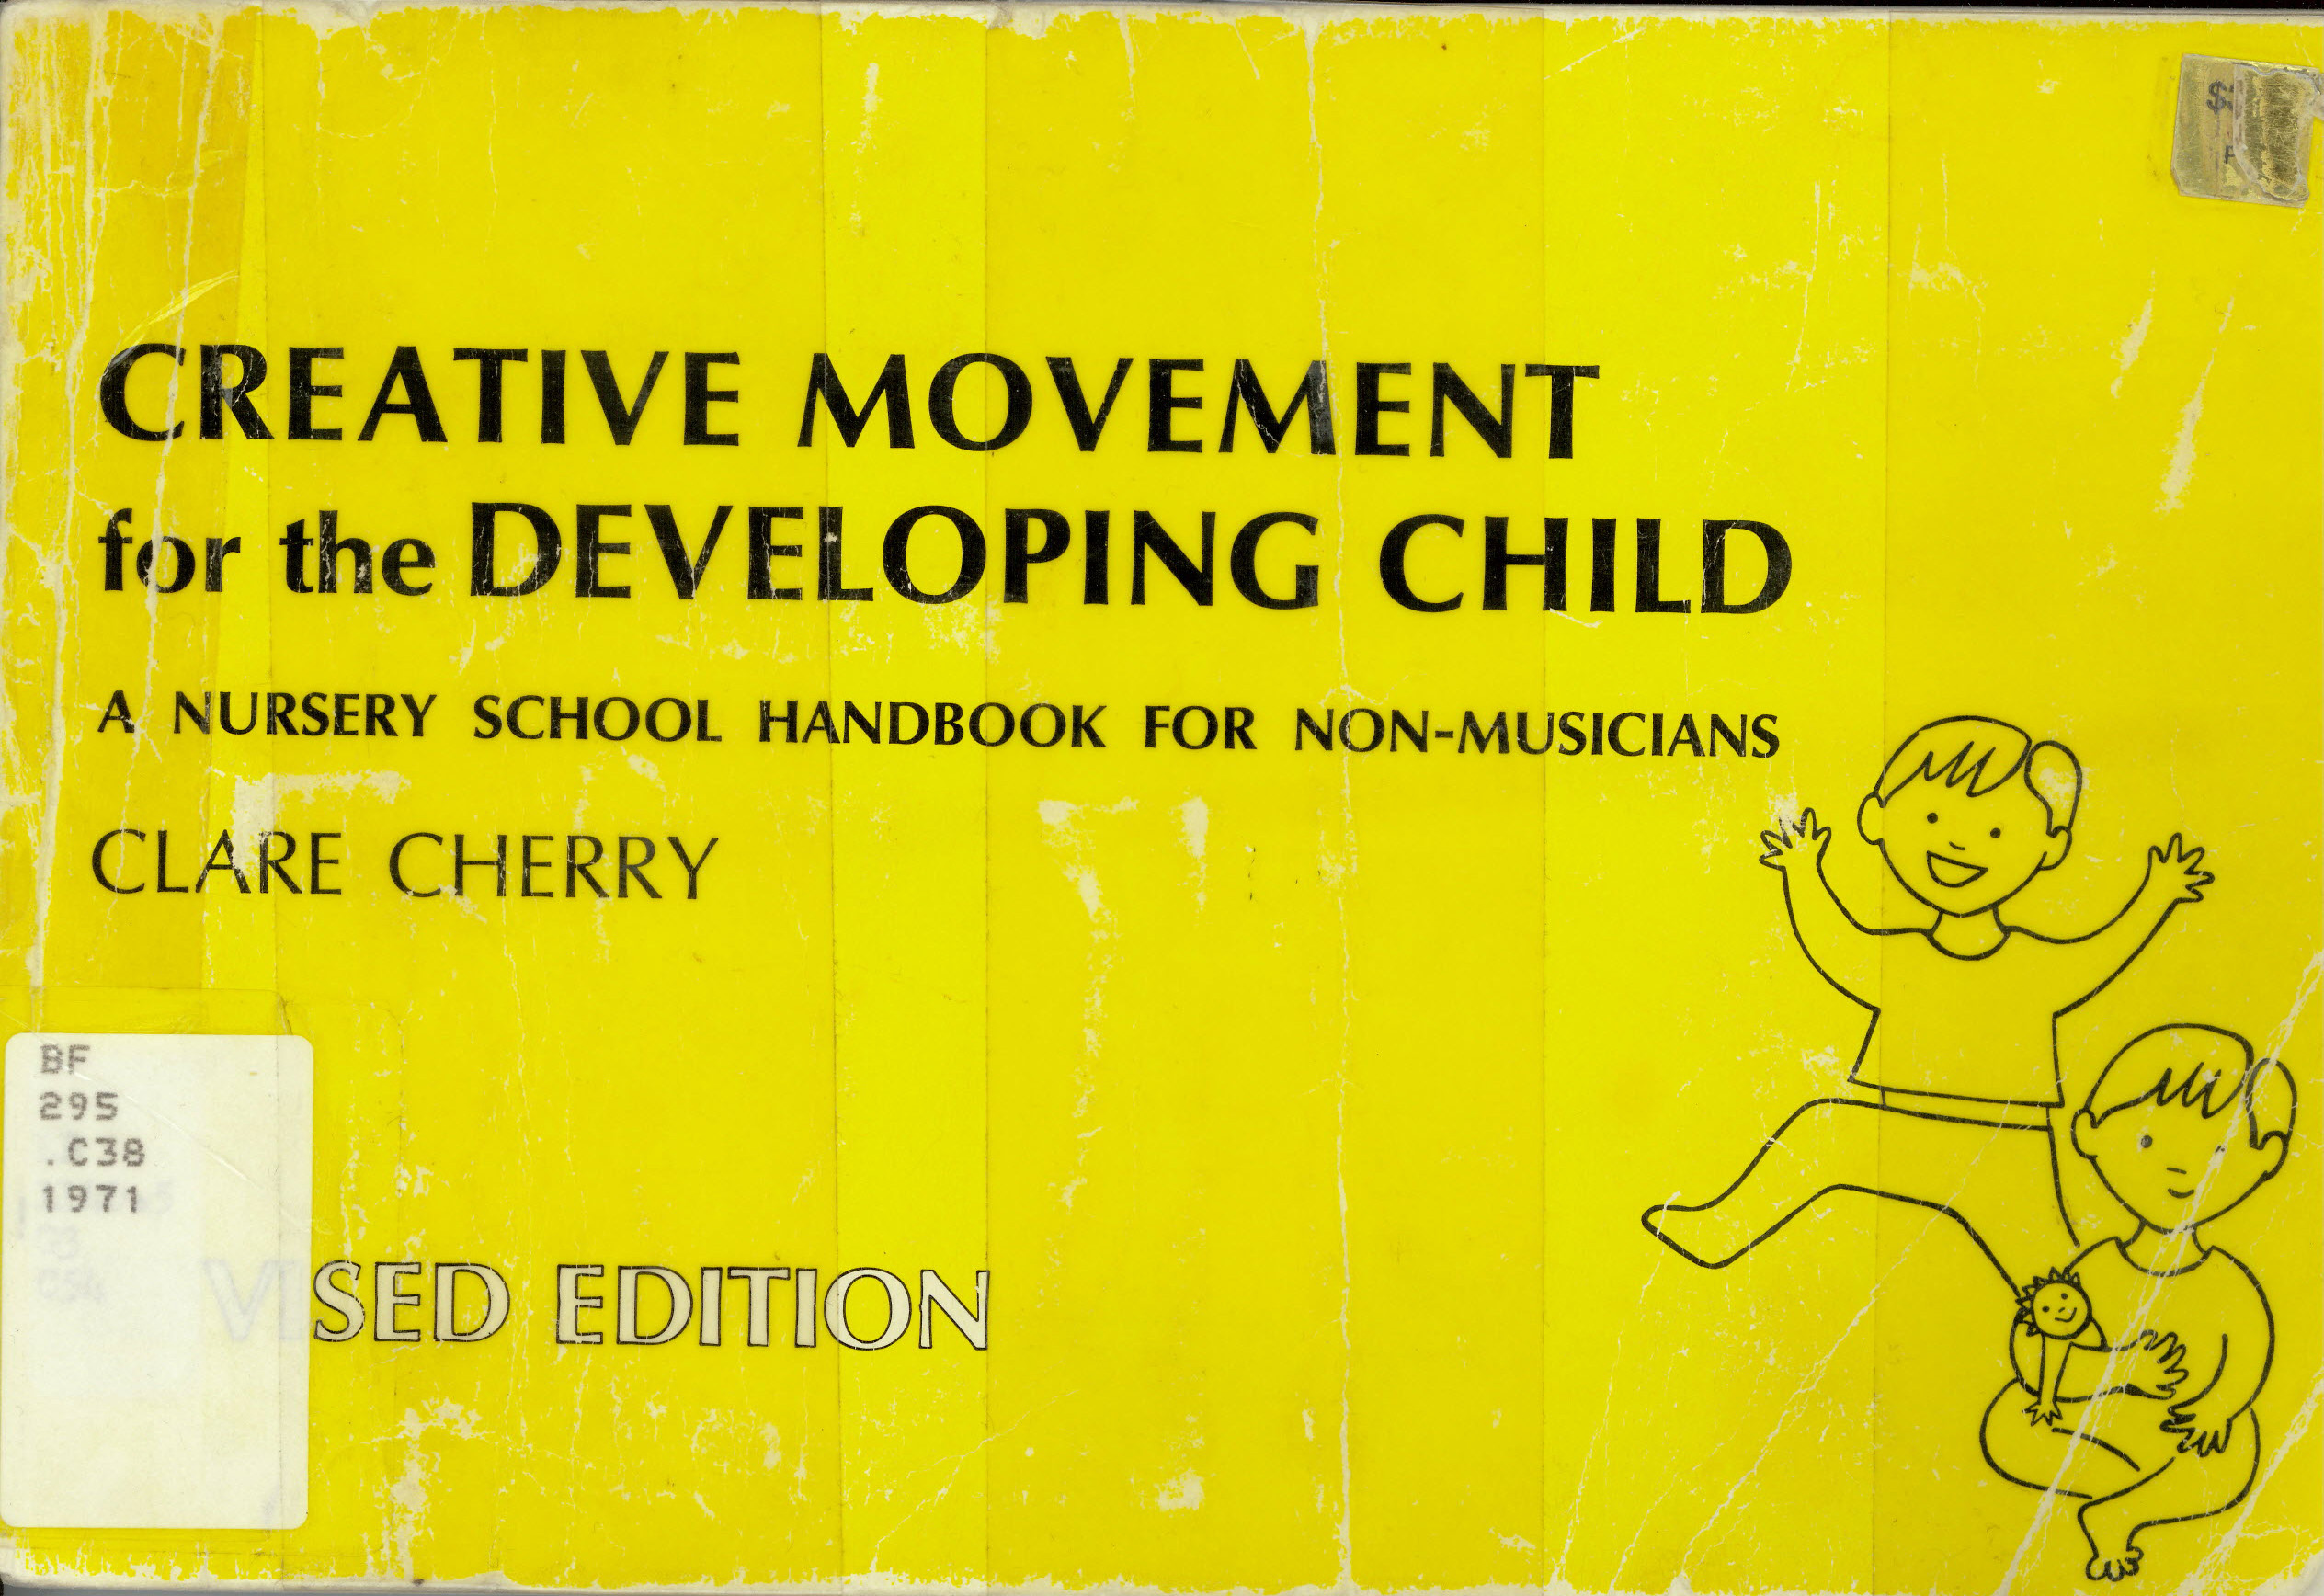 Creative movement for the developing child